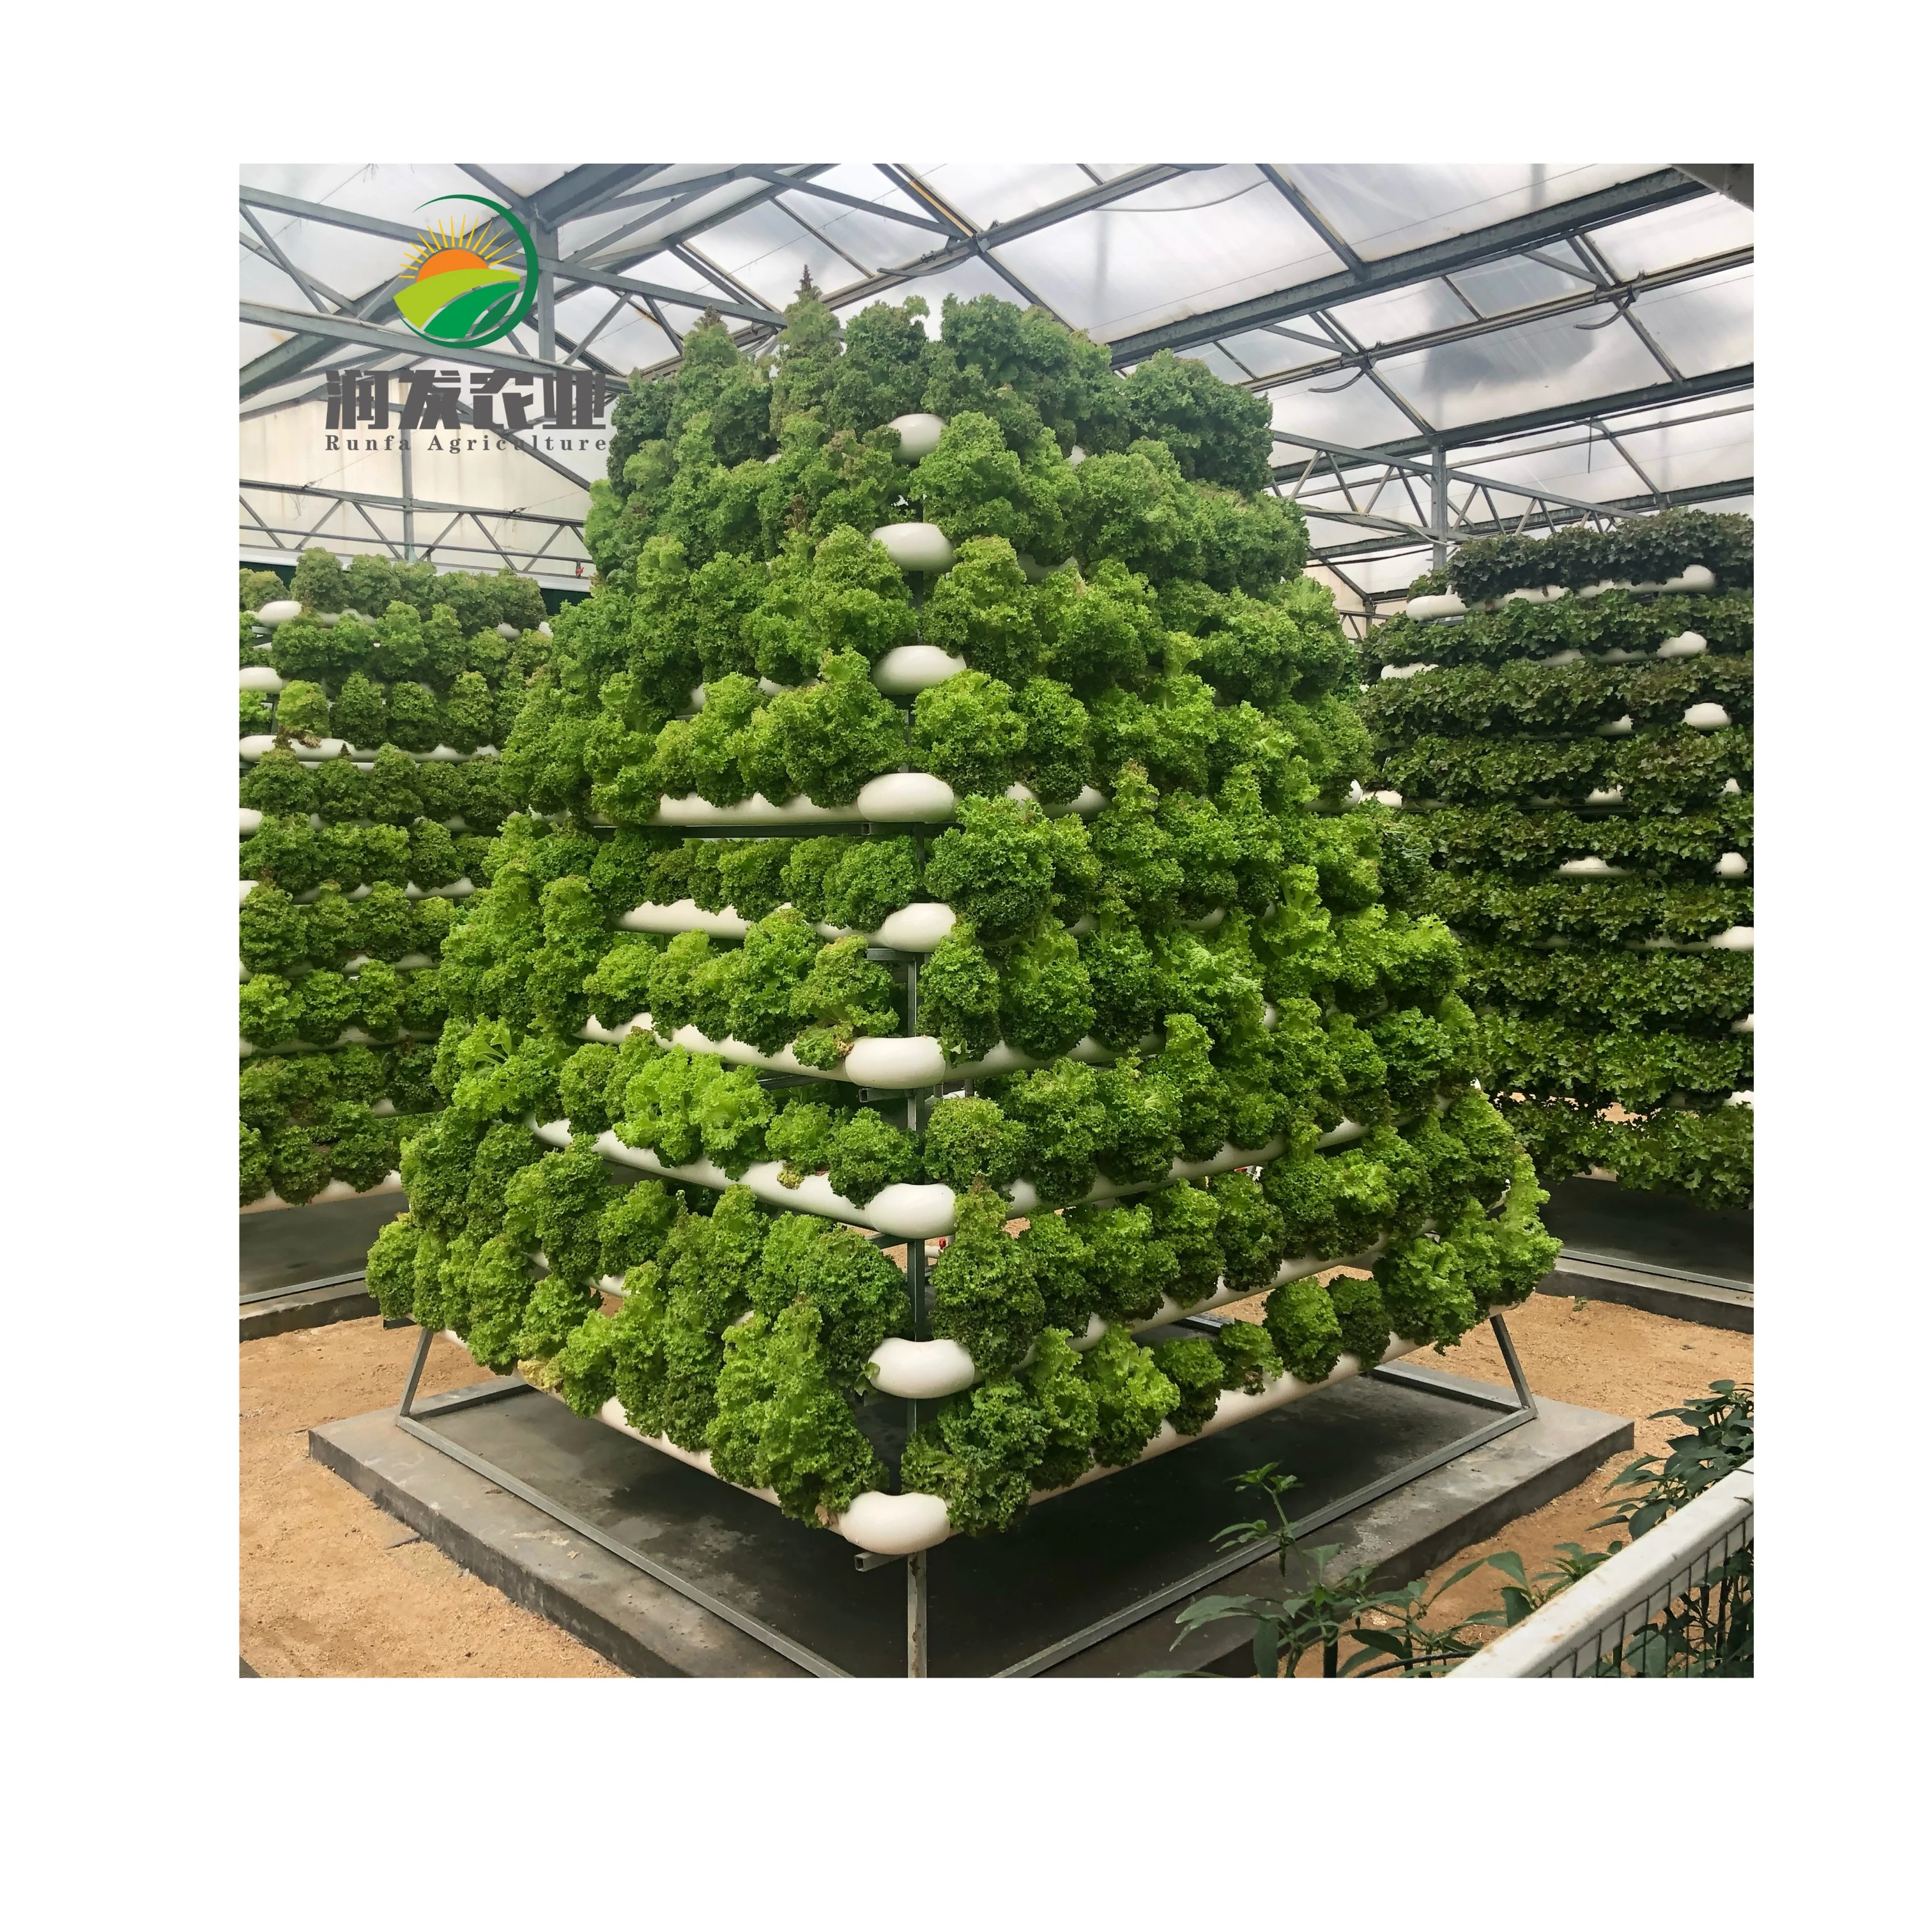 Hydroponics Vertical Farm System Plant Led Grow Li Grow Light Mover Indoor Micro Greens Agriculture Growing Co2 Fodder